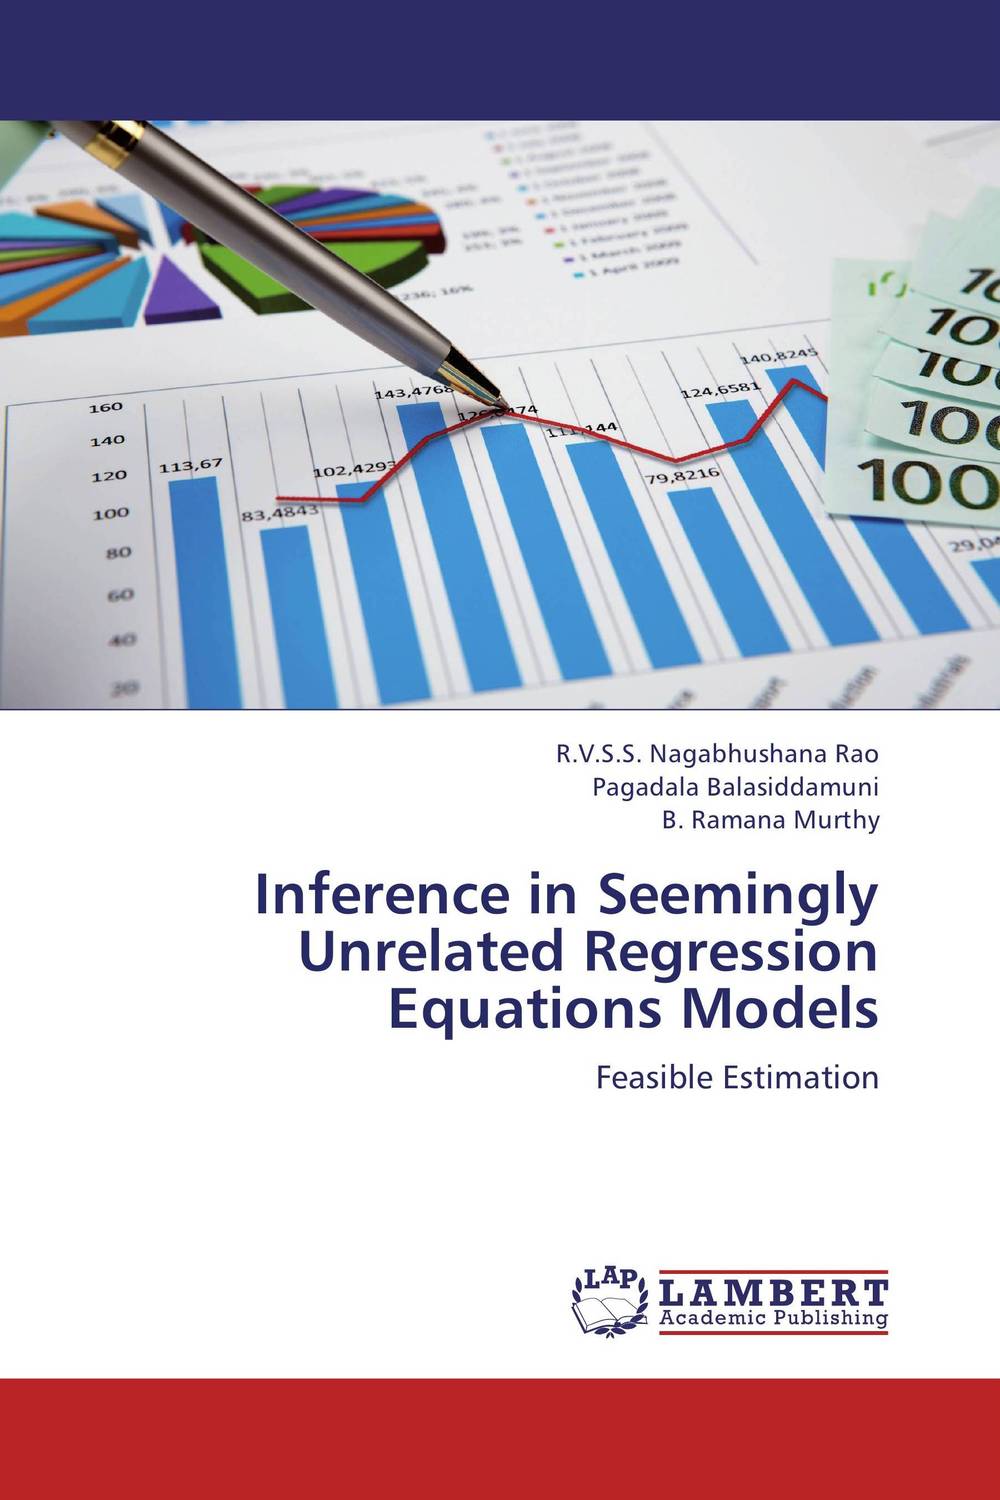 Inference in Seemingly Unrelated Regression Equations Models